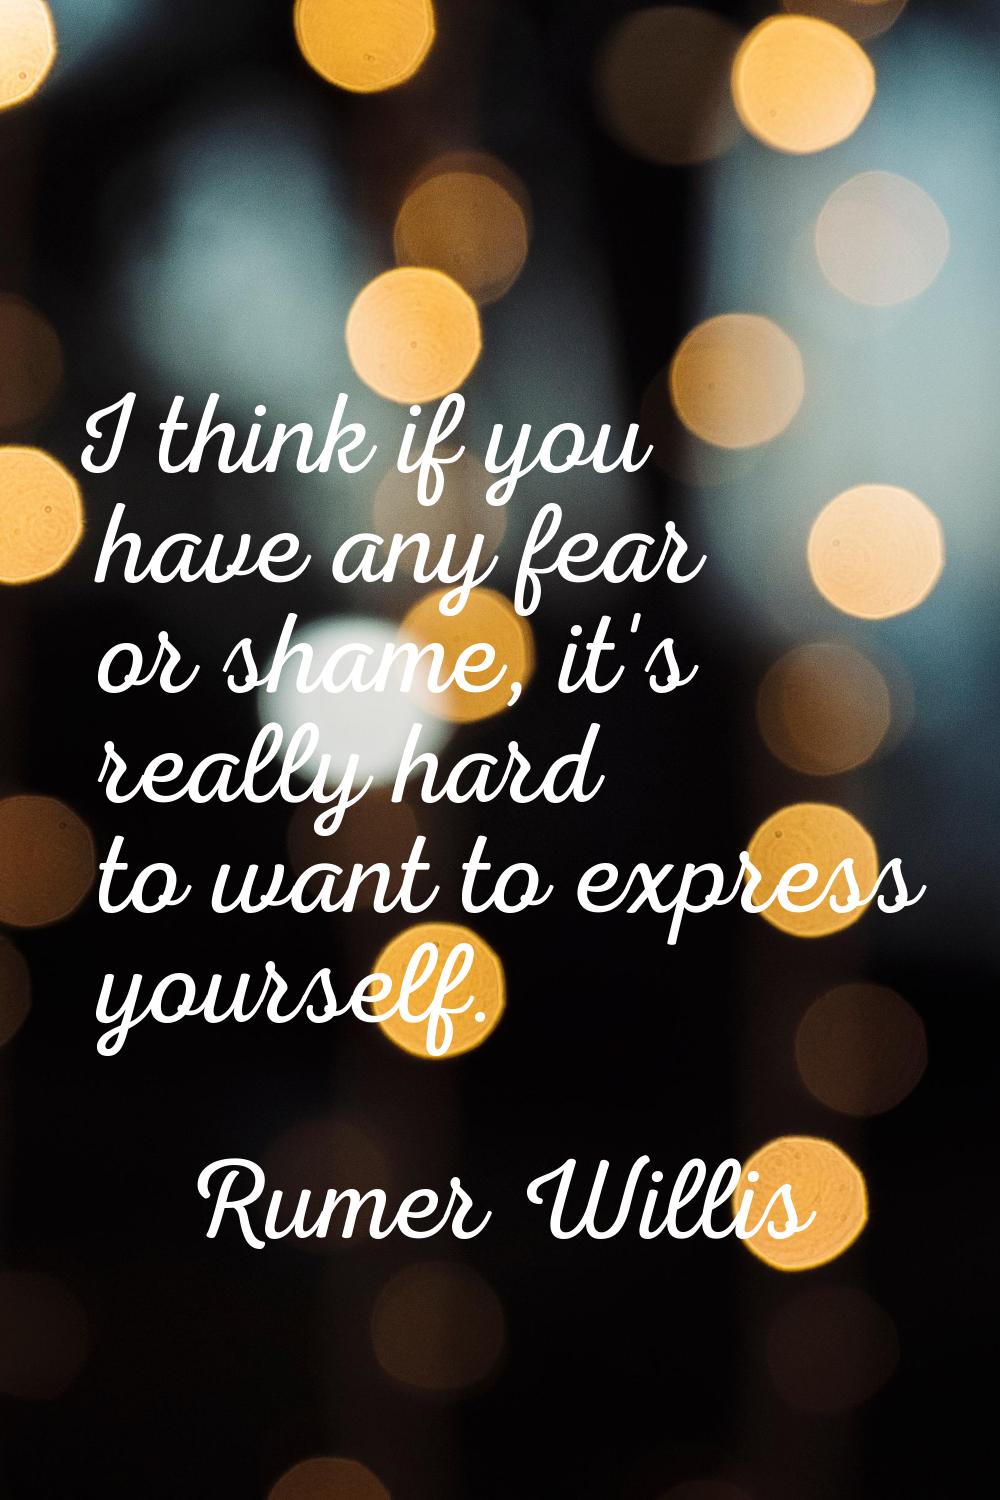 I think if you have any fear or shame, it's really hard to want to express yourself.